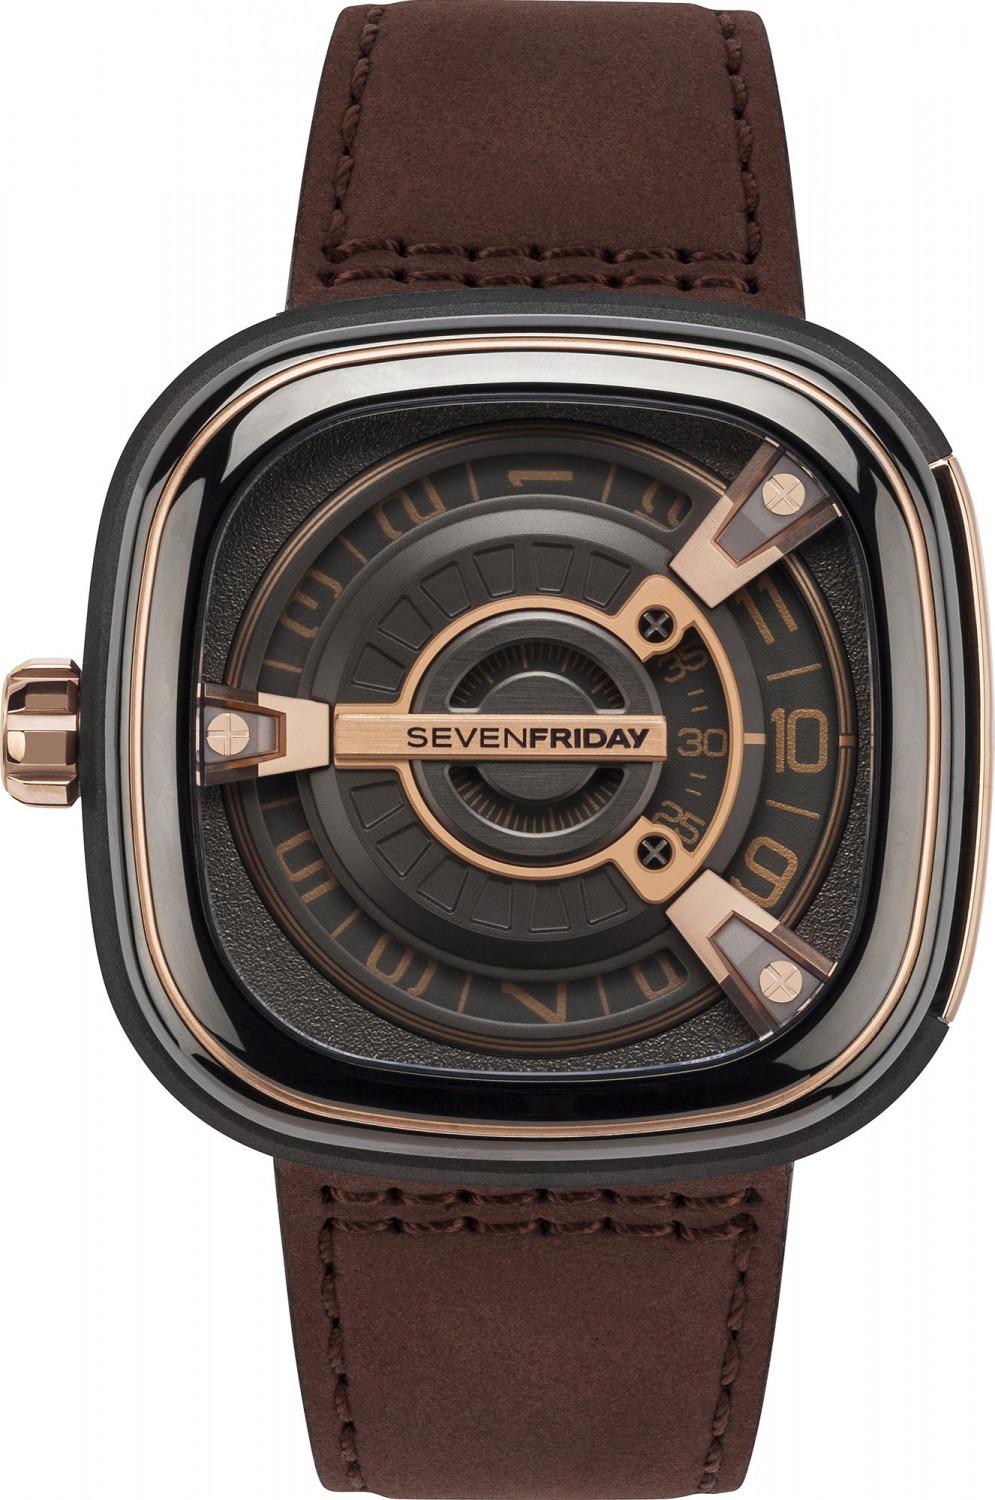 SevenFriday M-Series Industrial SF-M2/02 watch, two - tone (bi - colored) dark grey and rose gold